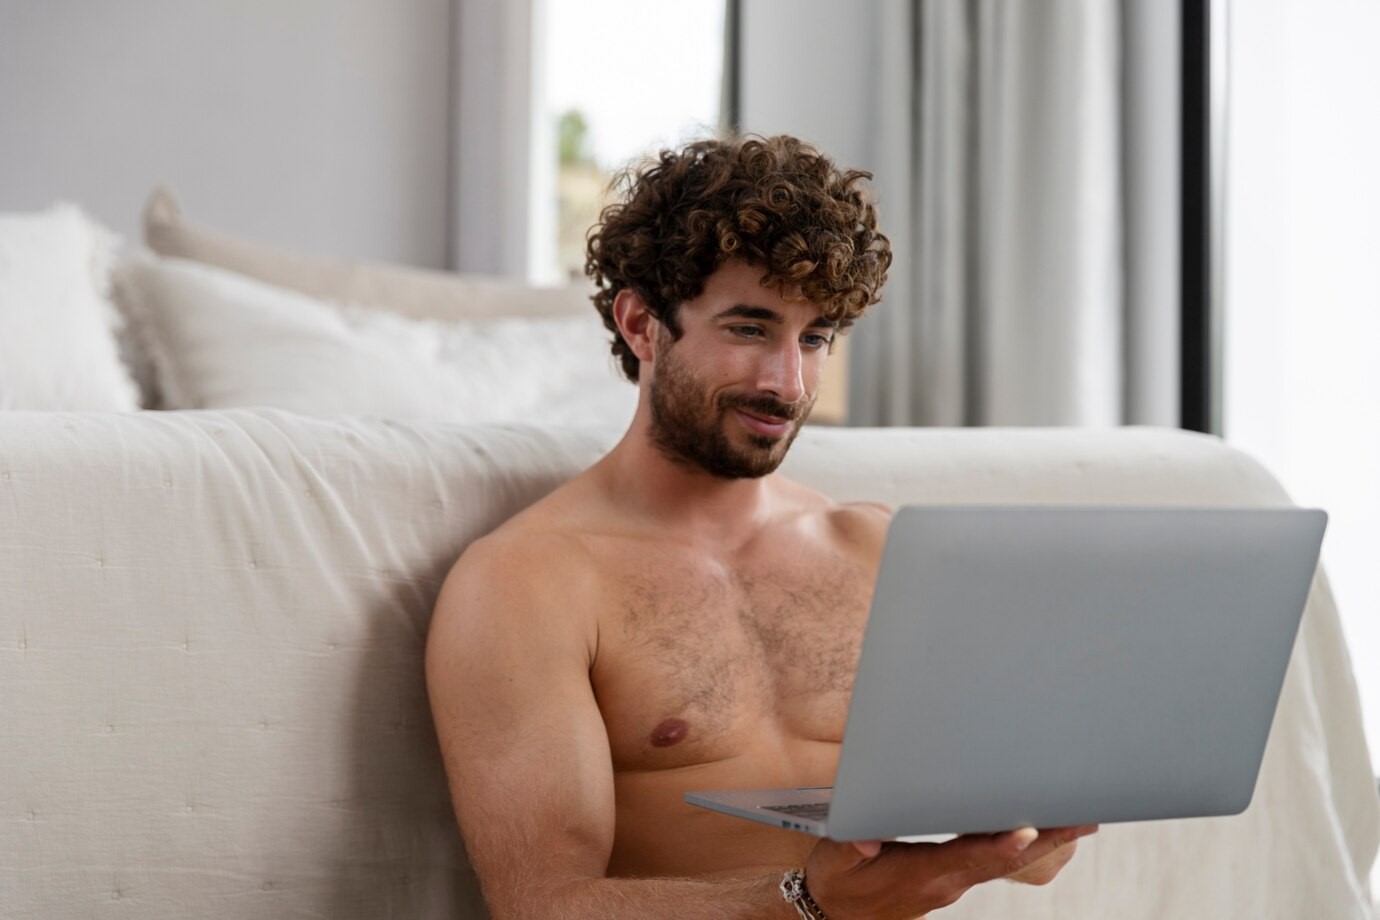 Free video chat with gays you can come across energetic, romantic and so many more types of people